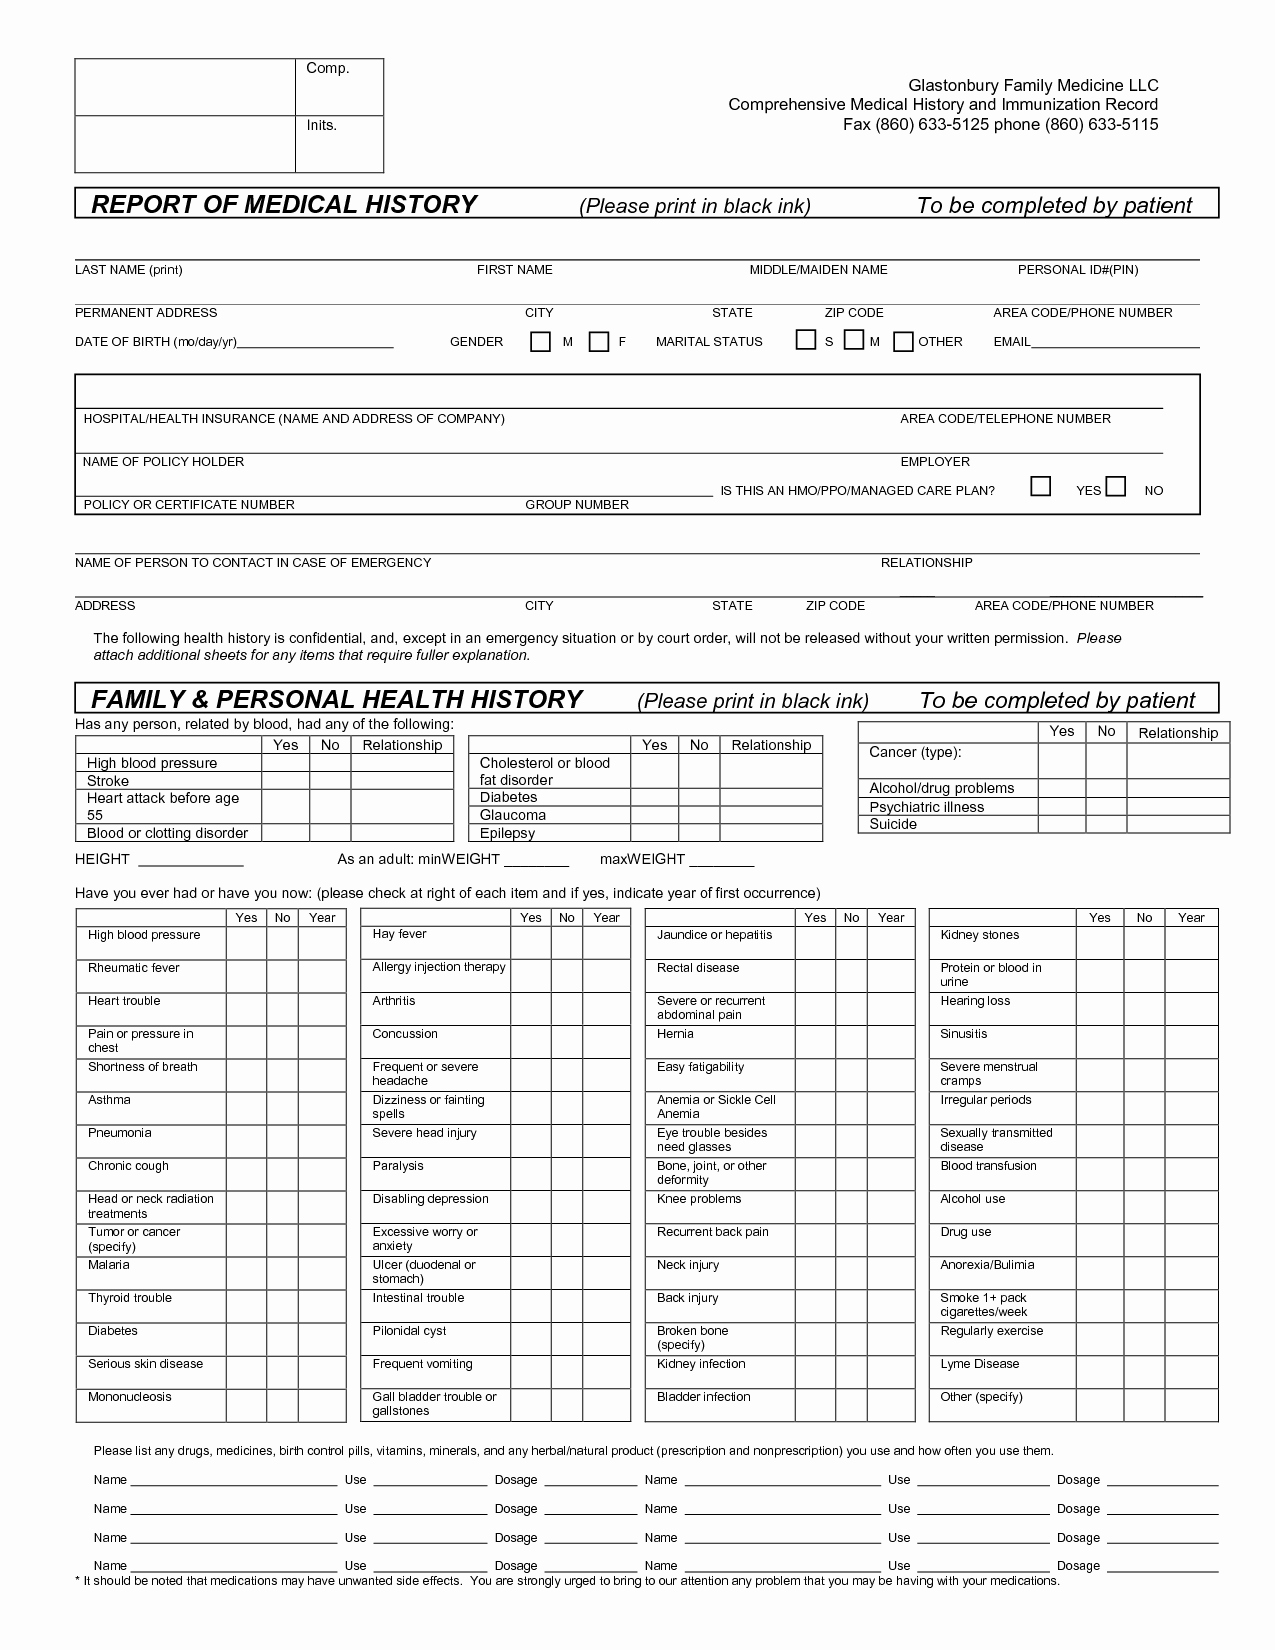 Personal Medical Record Template Unique Report Of Medical History Family Personal Health History